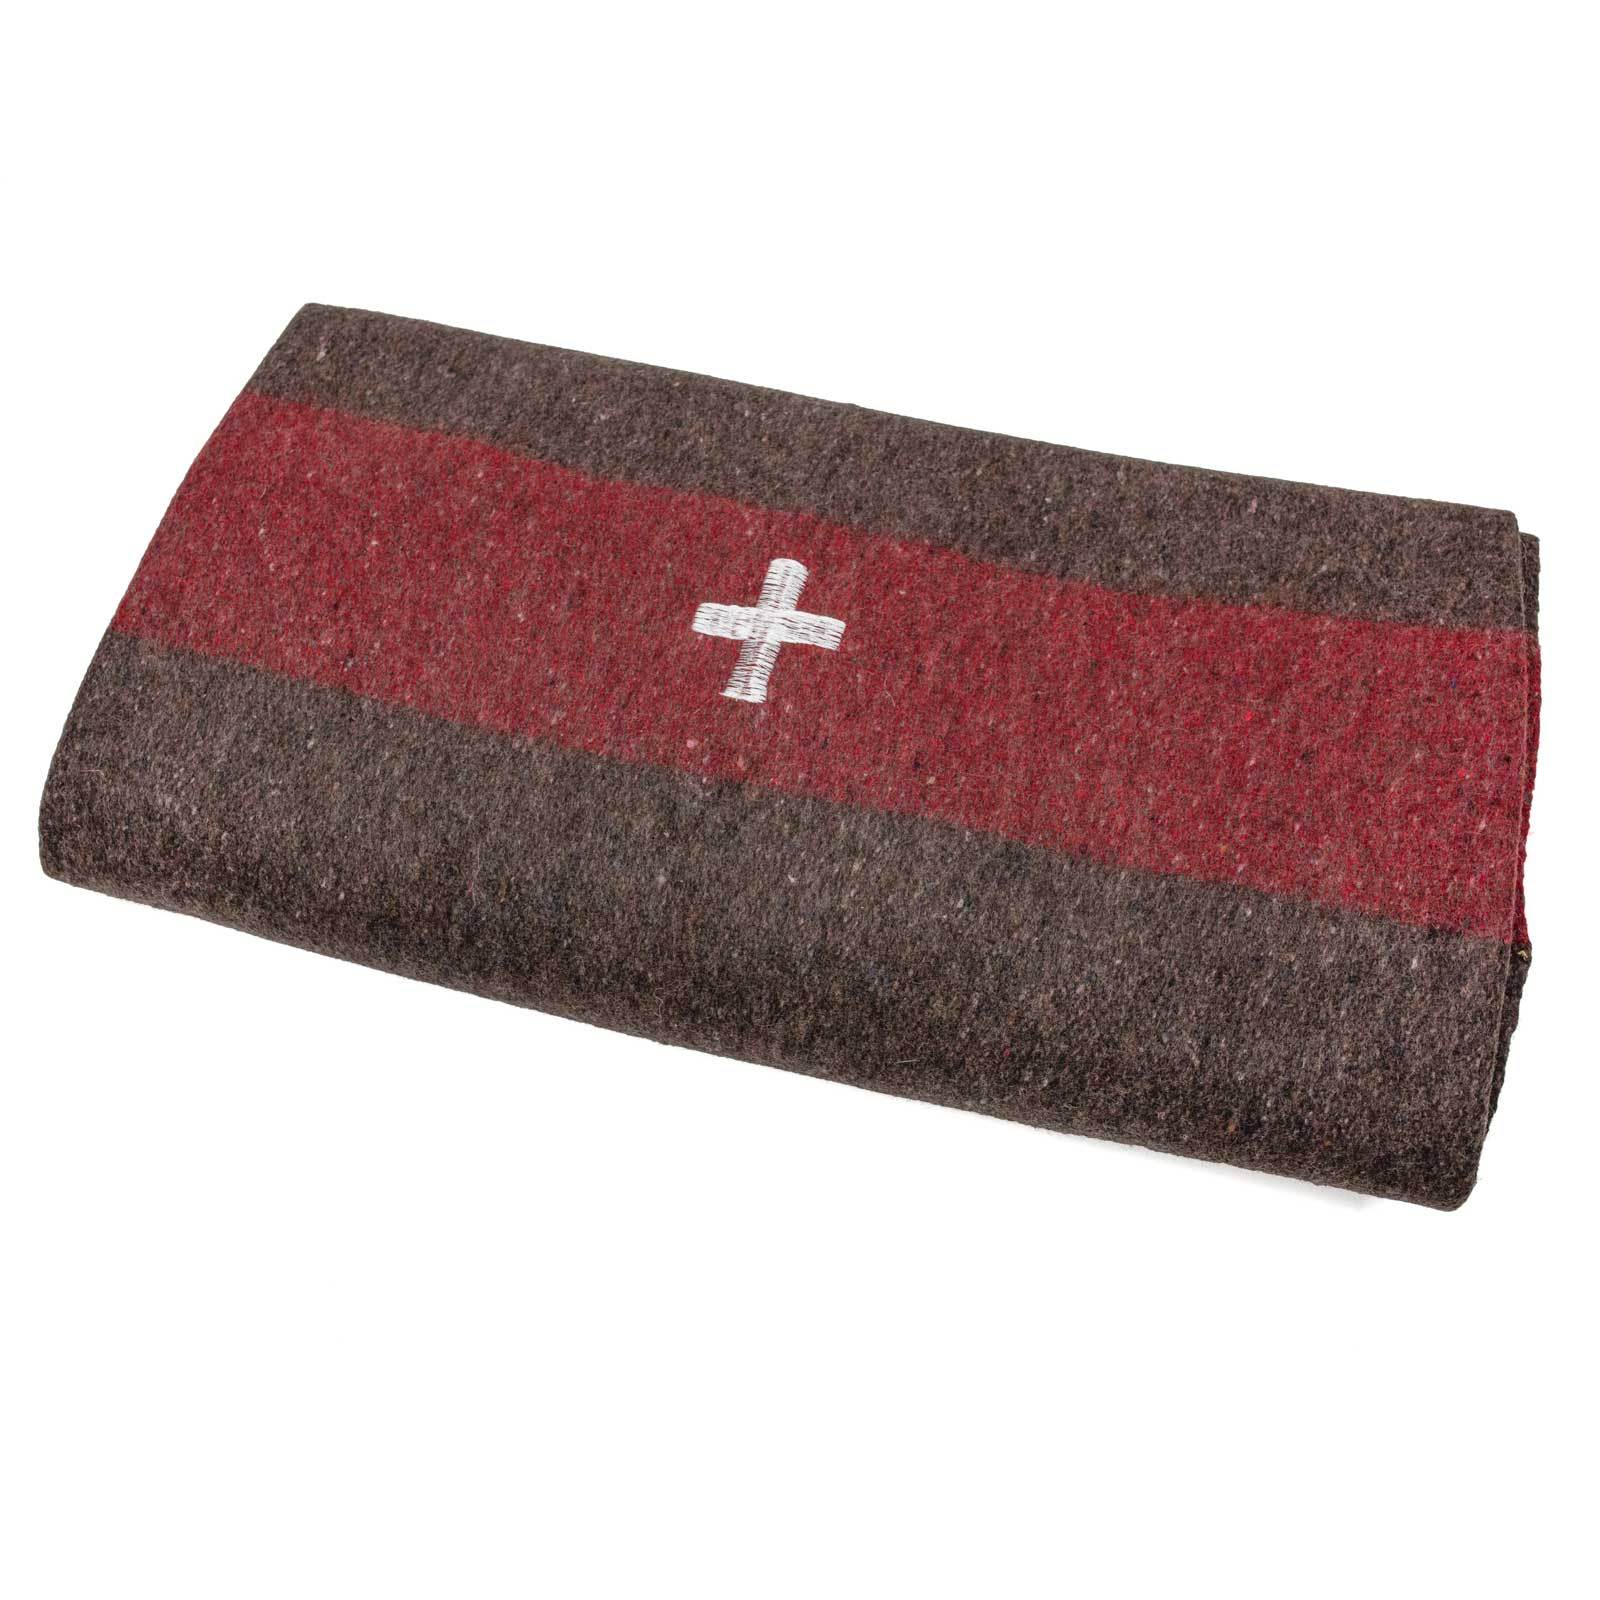 Swiss Army Reproduction Wool Blanket Overland Addict